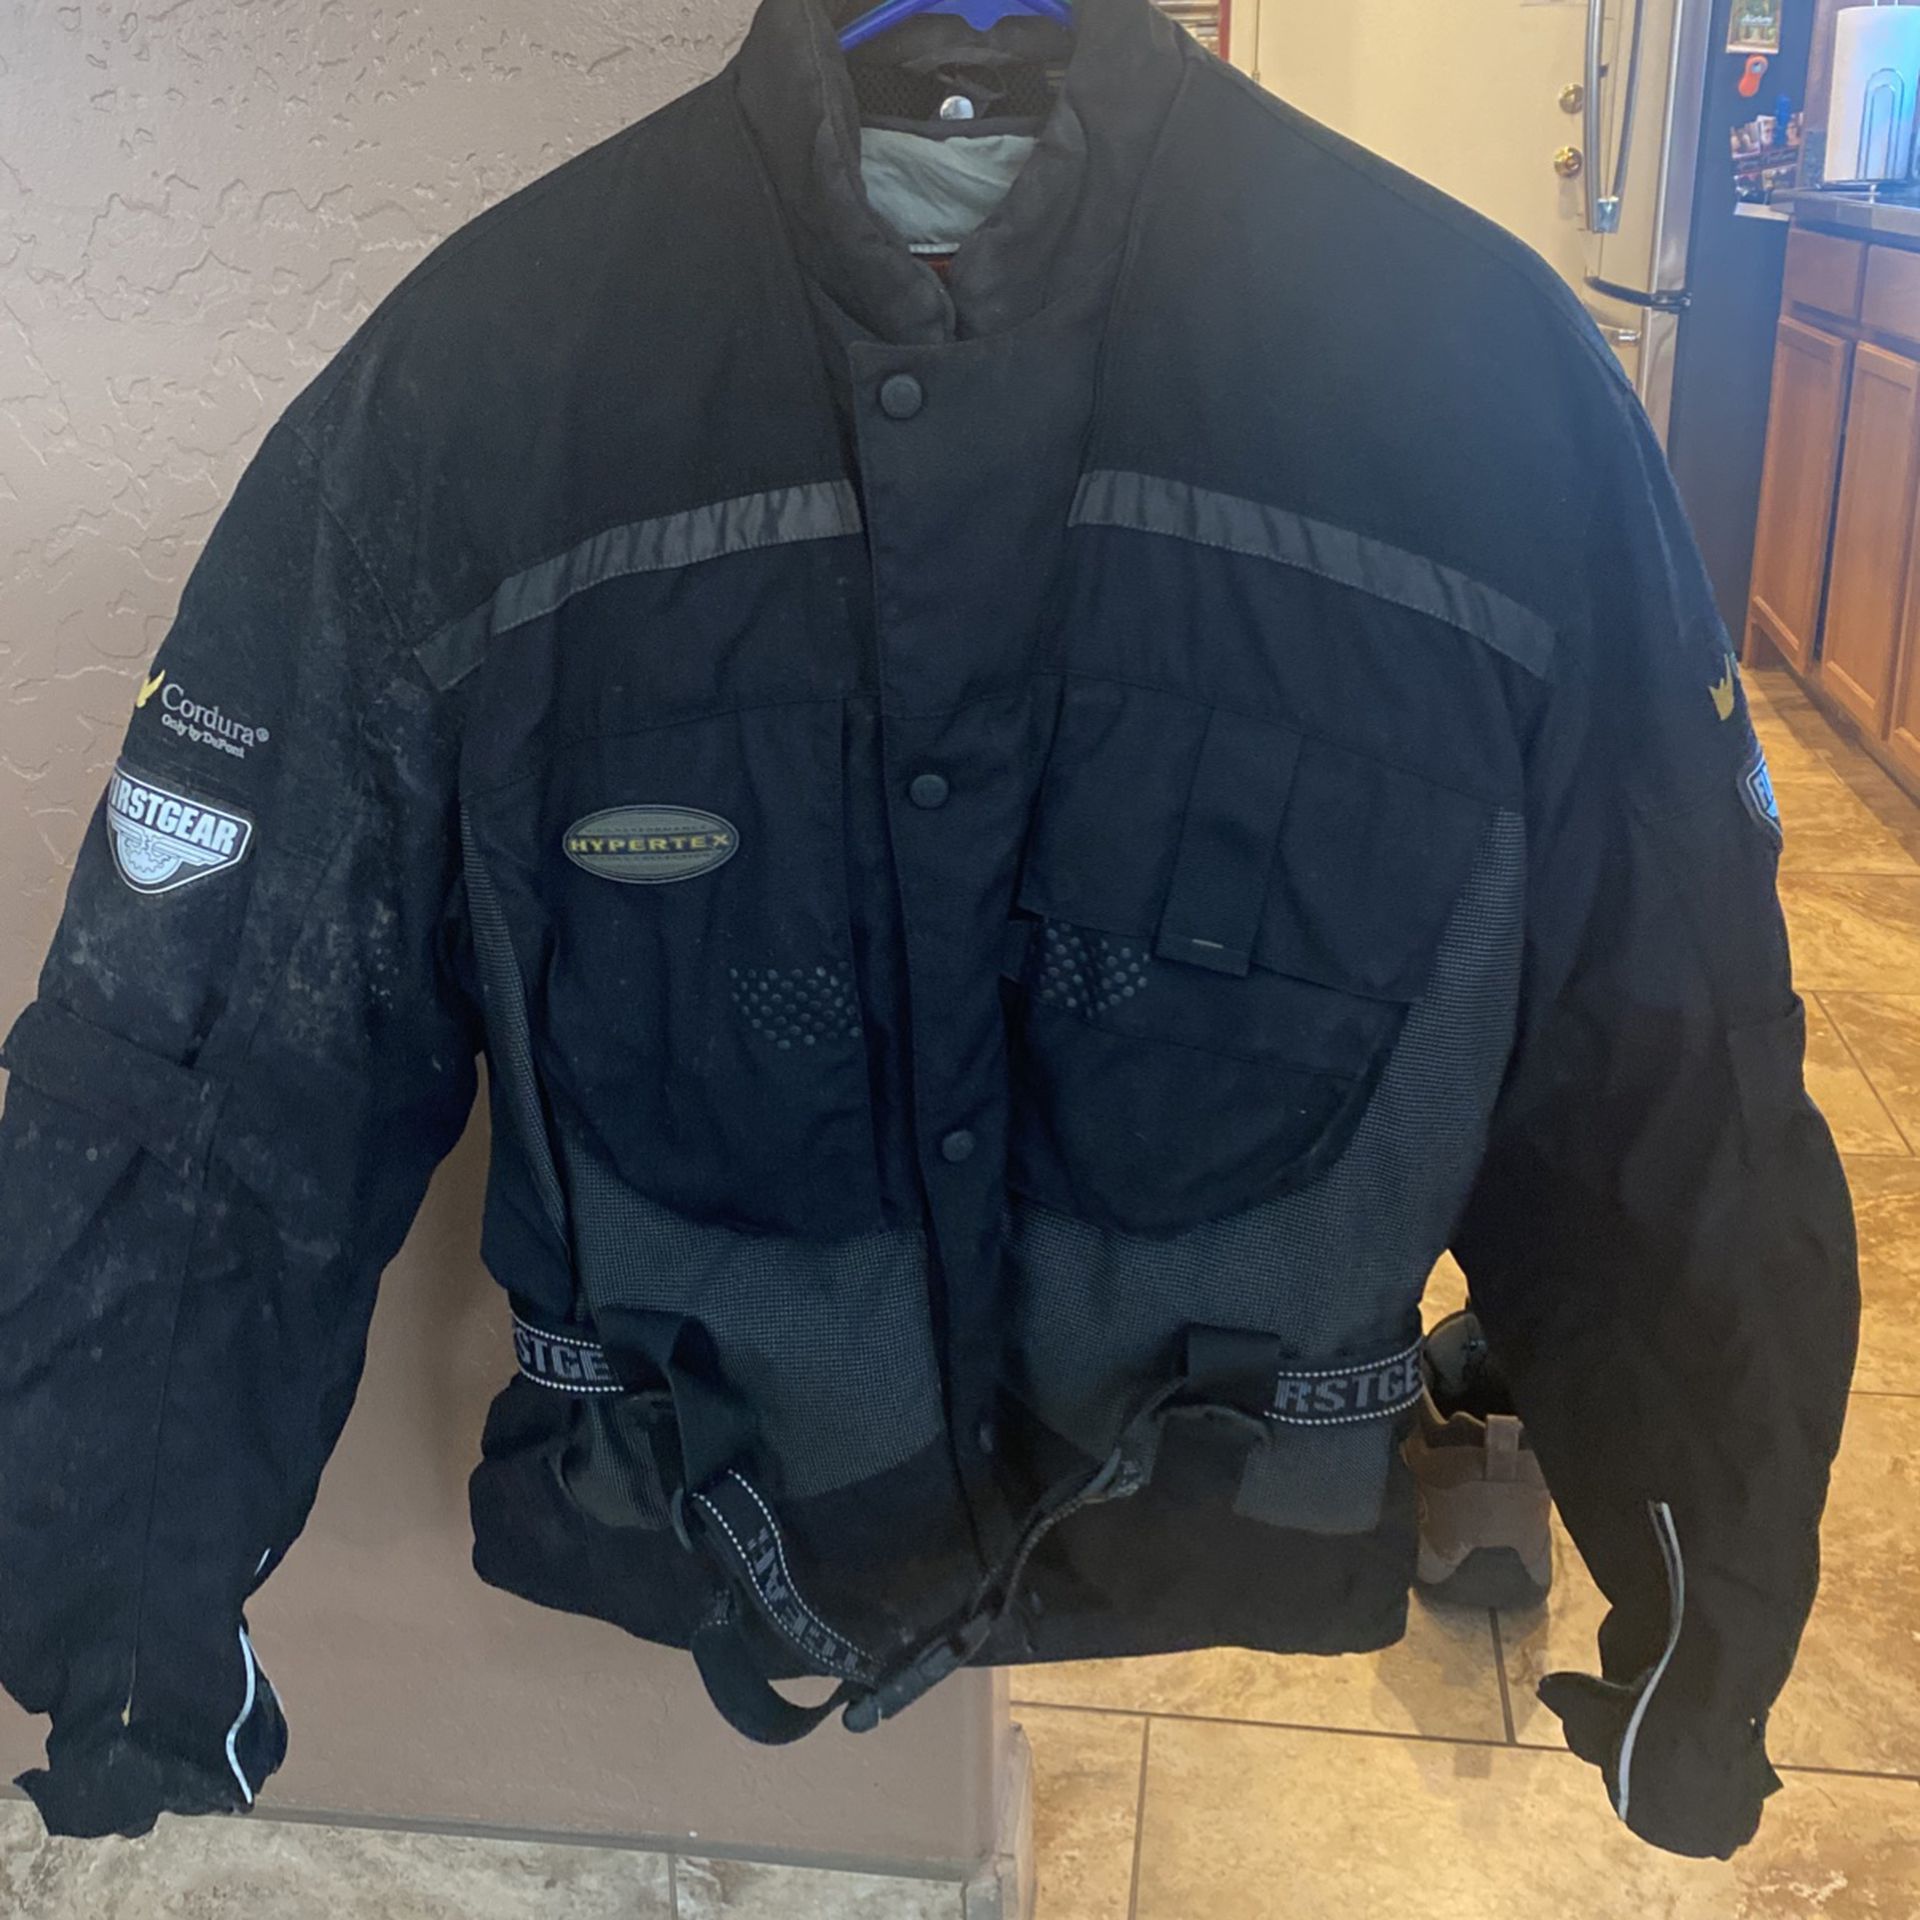 First Gear Jacket And Pants